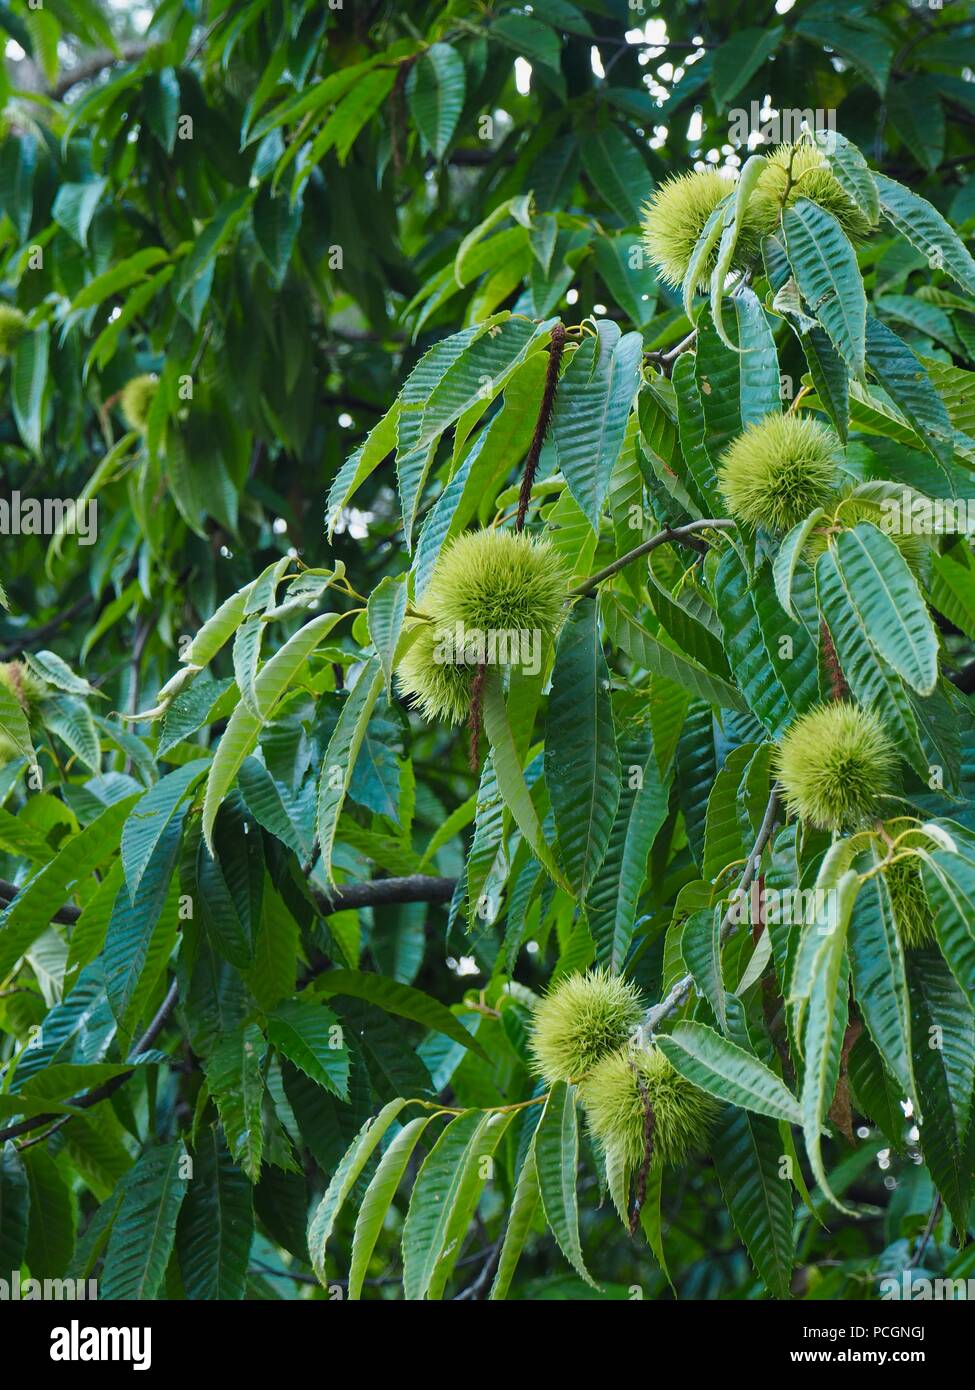 American Chestnut Tree High Resolution Stock Photography and Images - Alamy